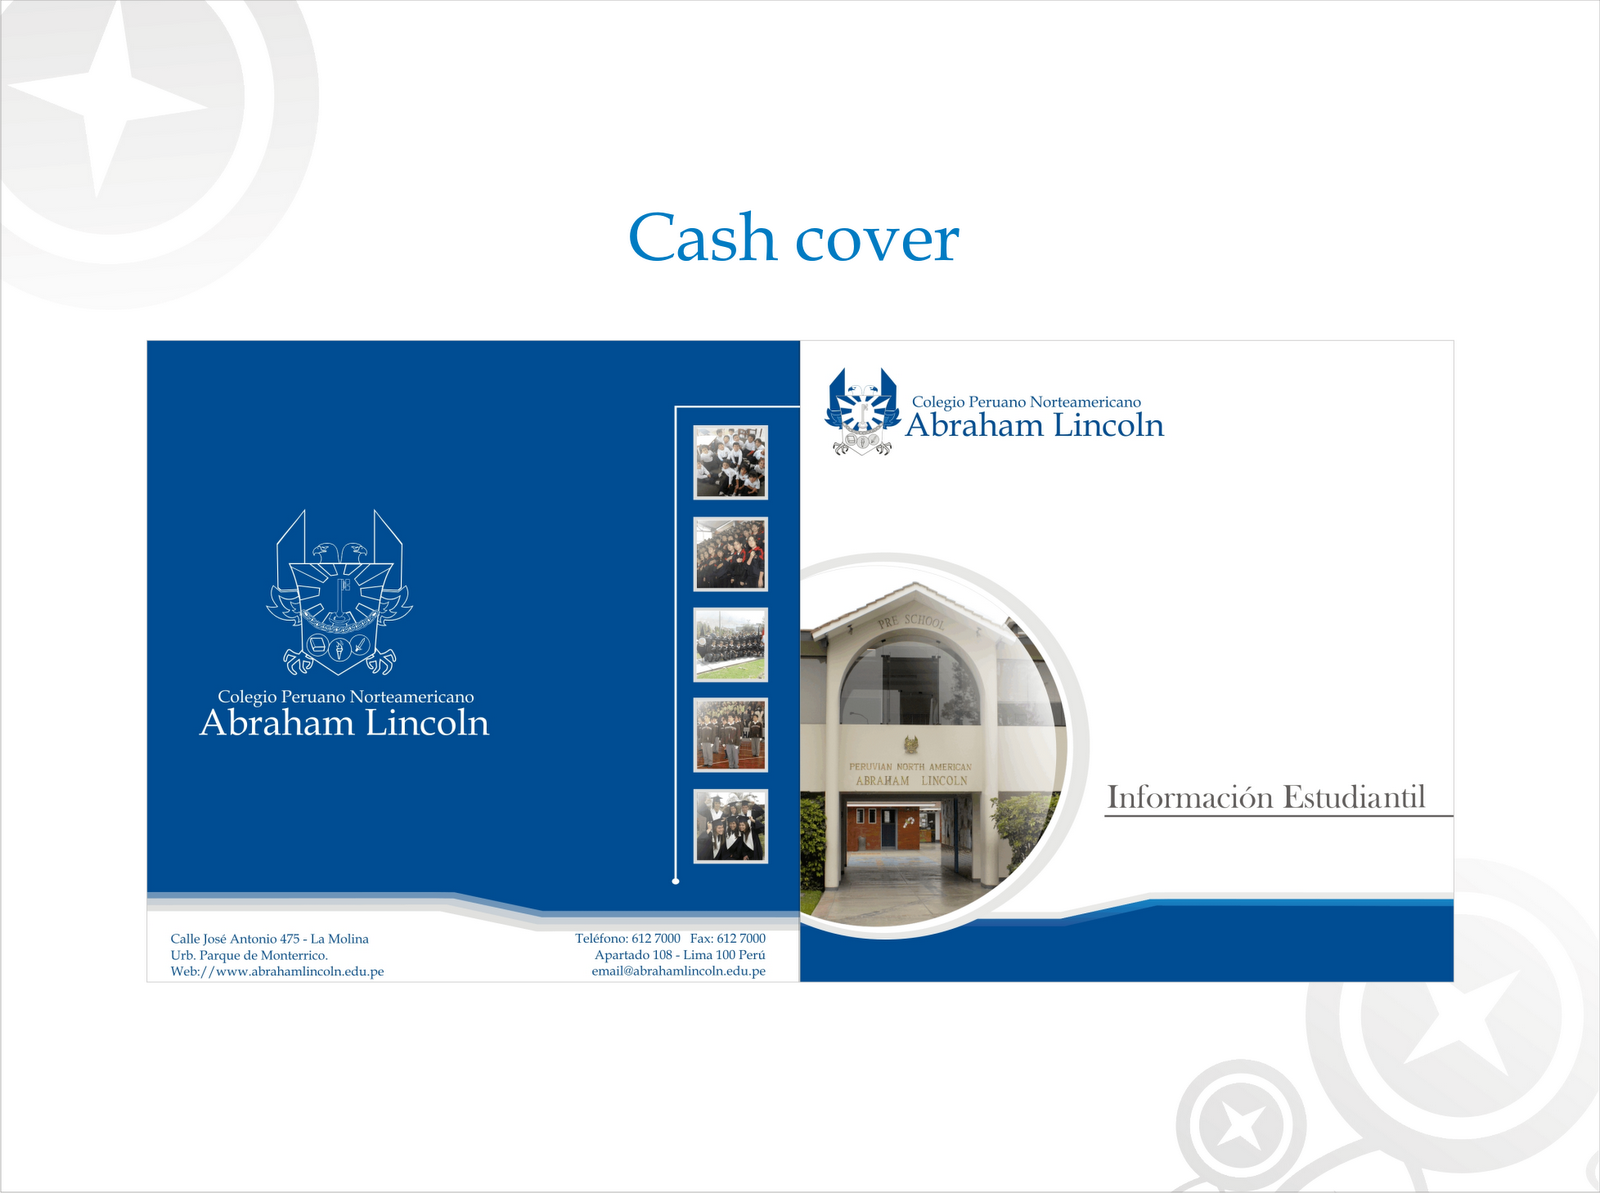 [cashcover.png]